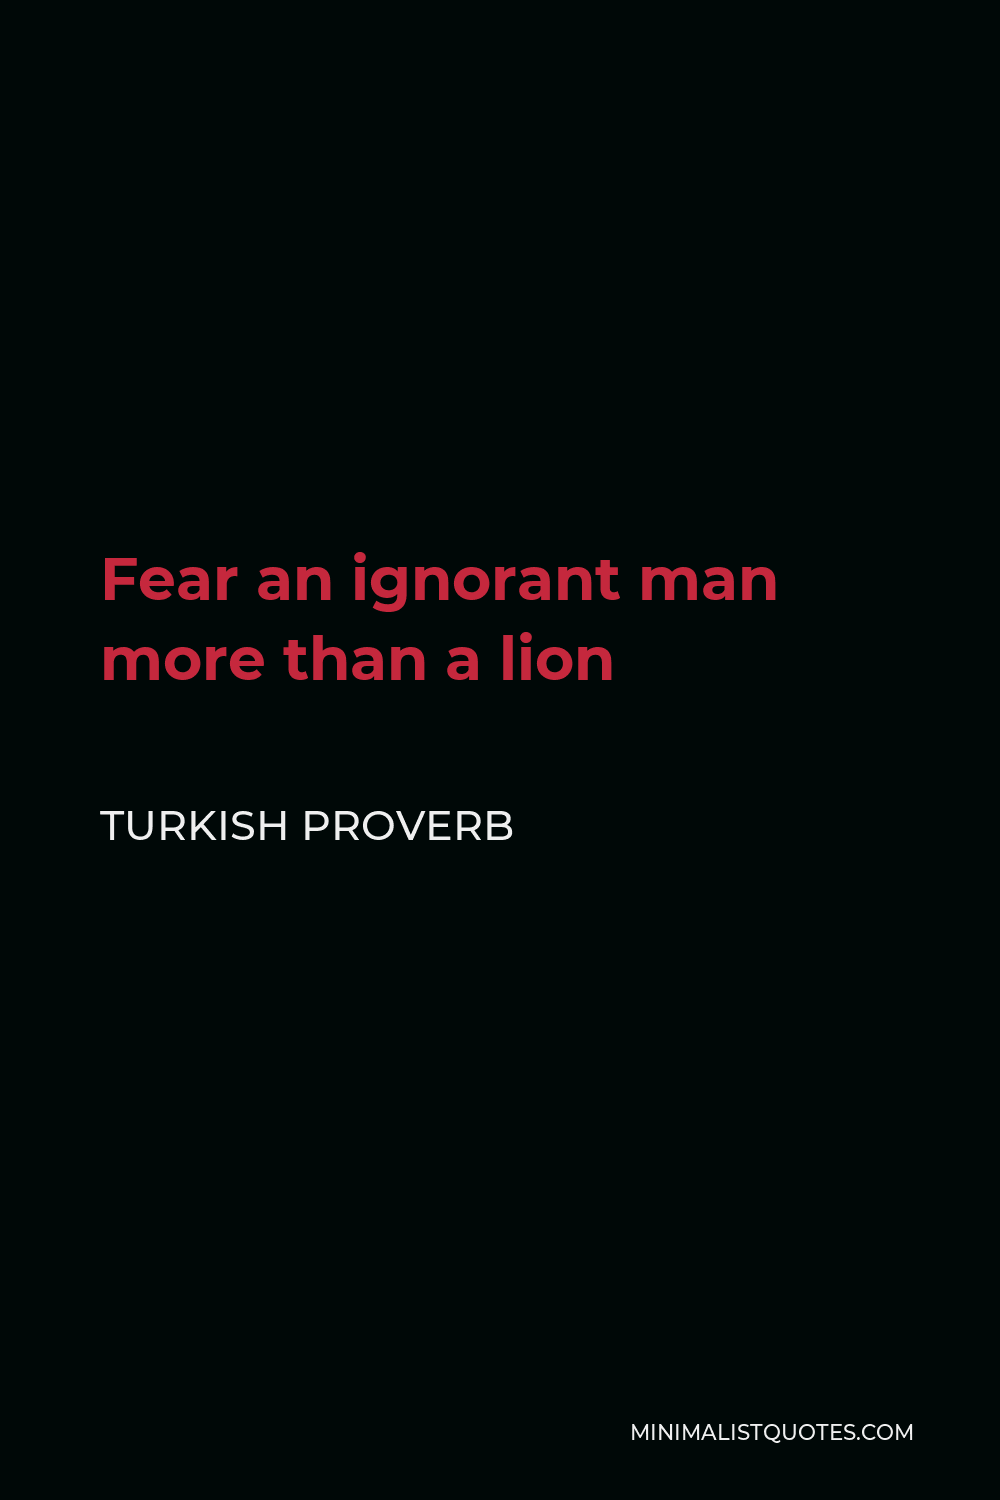 Turkish Proverb Quote - Fear an ignorant man more than a lion